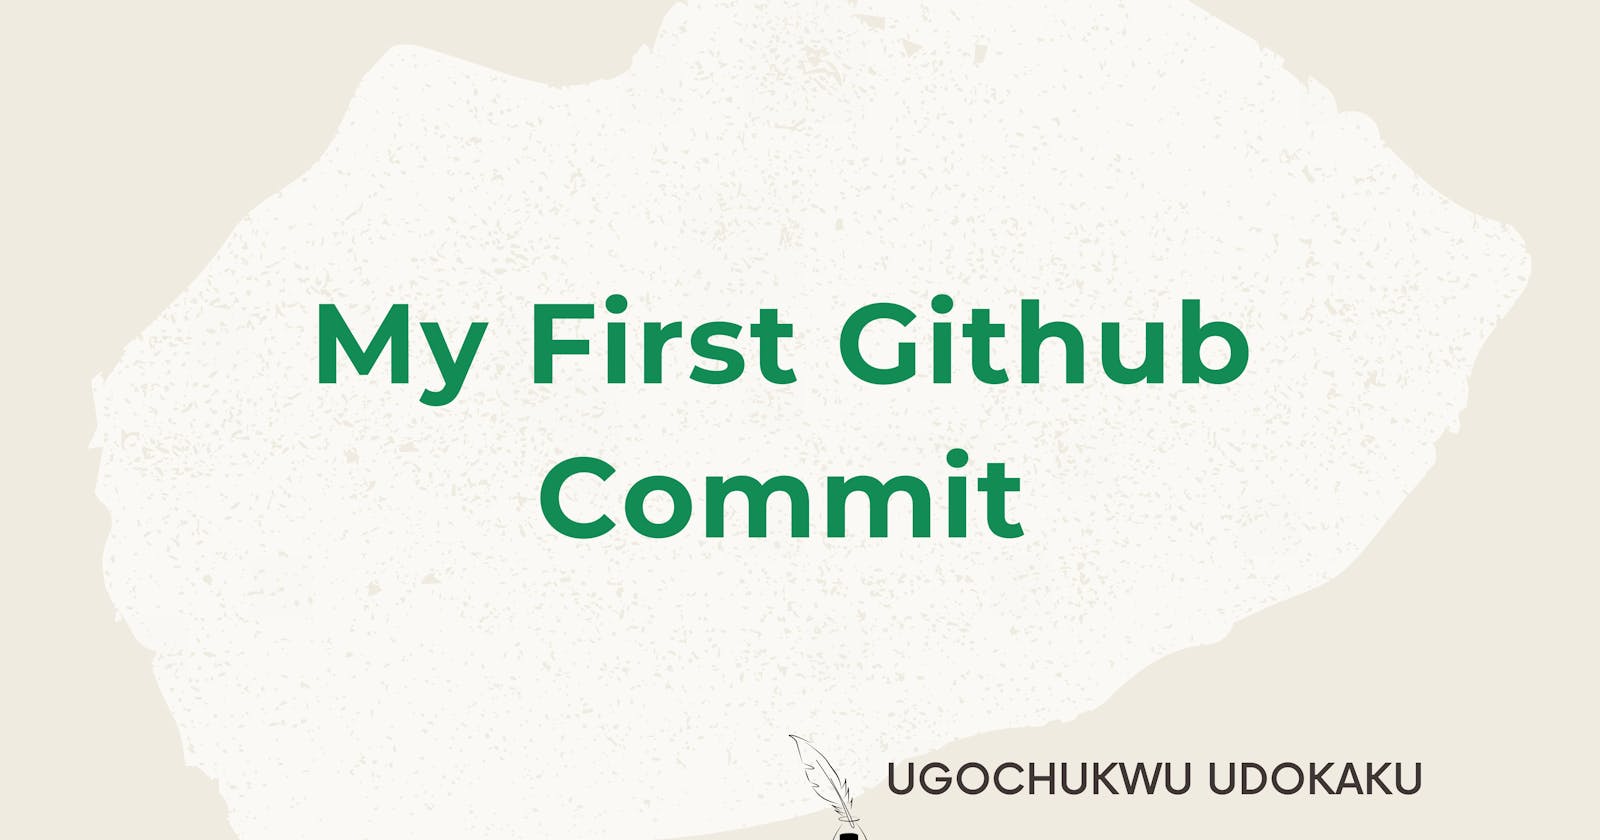 My first Github Commit